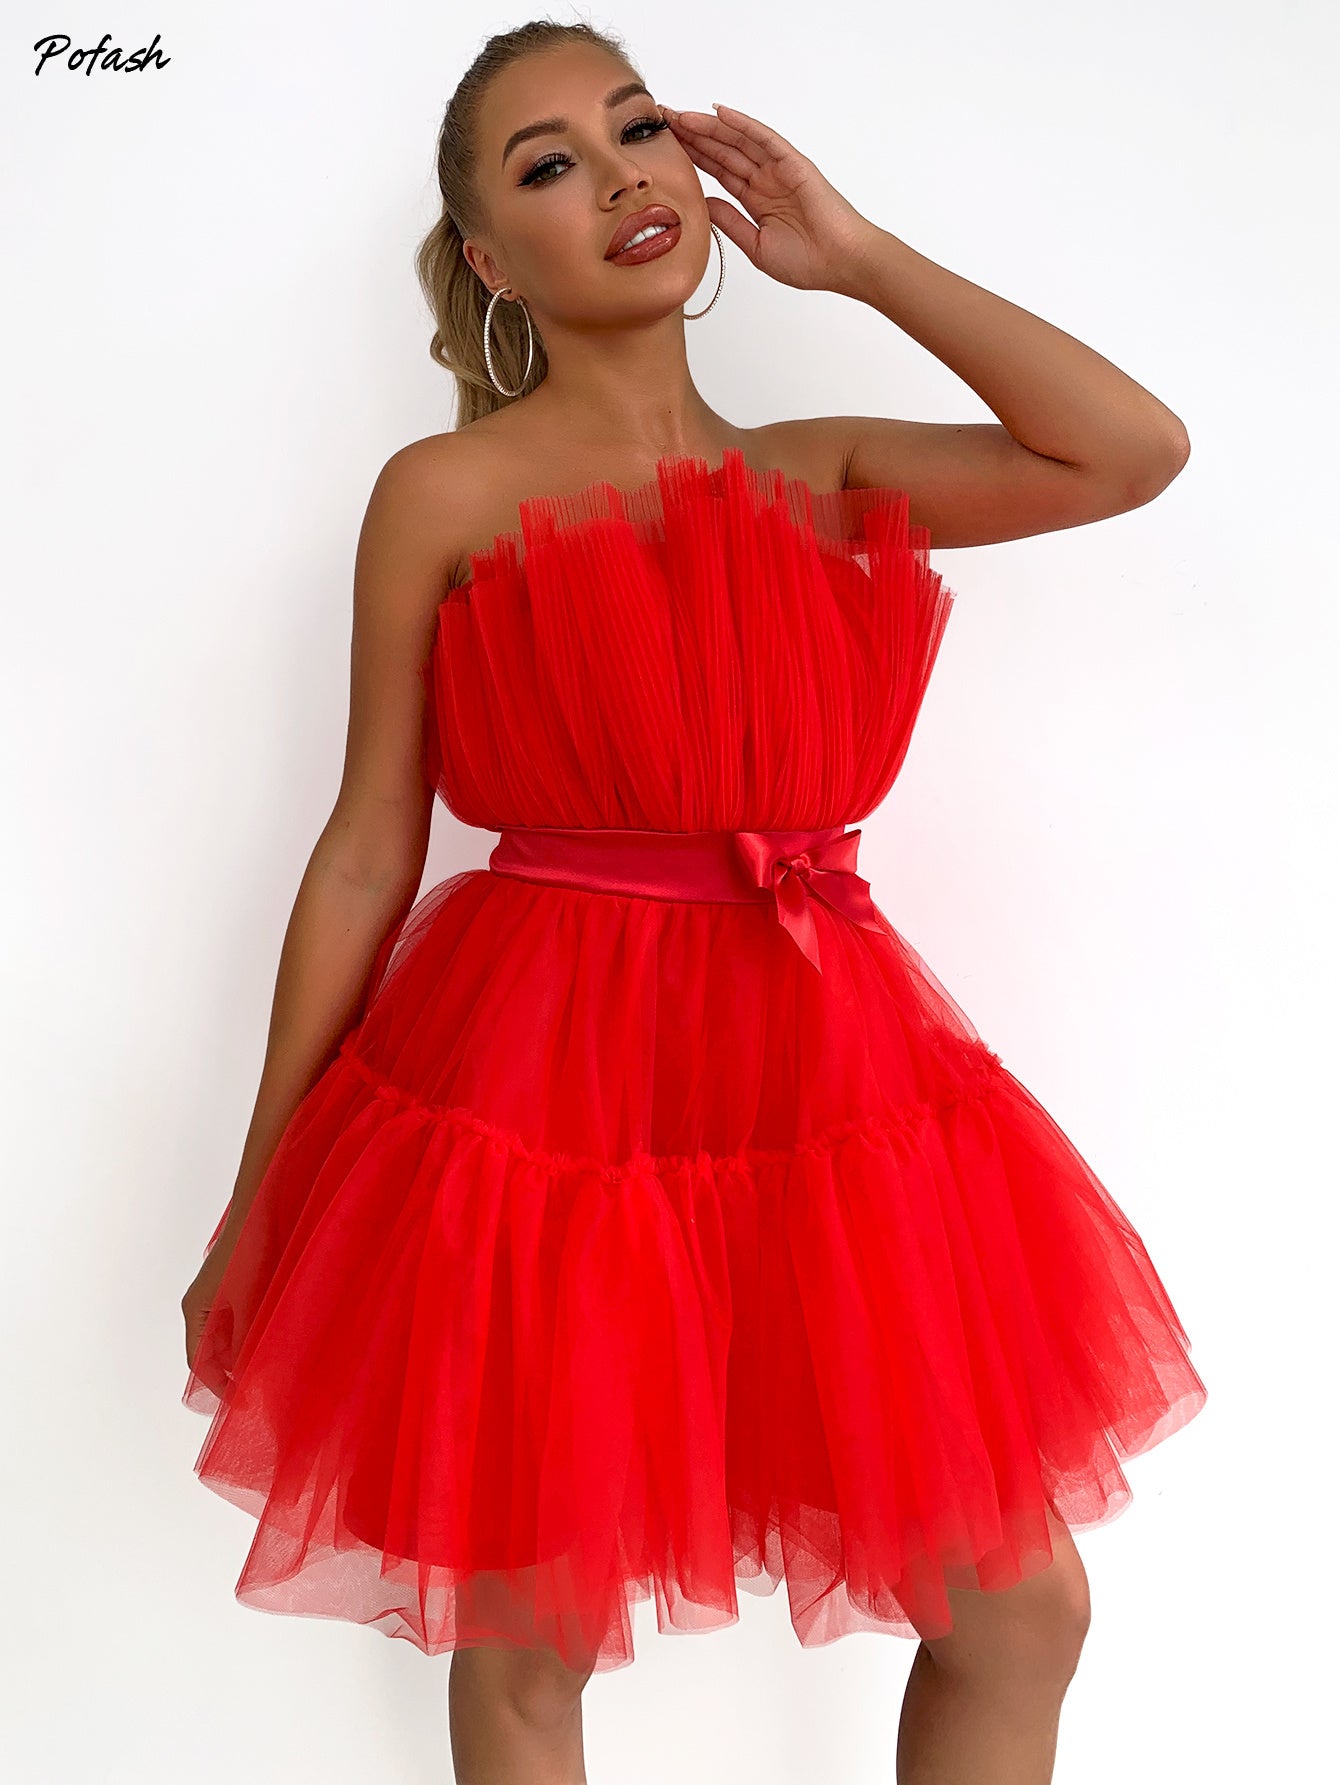 Mesh Solid Bow Mini Dress Women Layered Strapless Ball Gown Sexy Party Club Dress Backless Summer Dress The Clothing Company Sydney